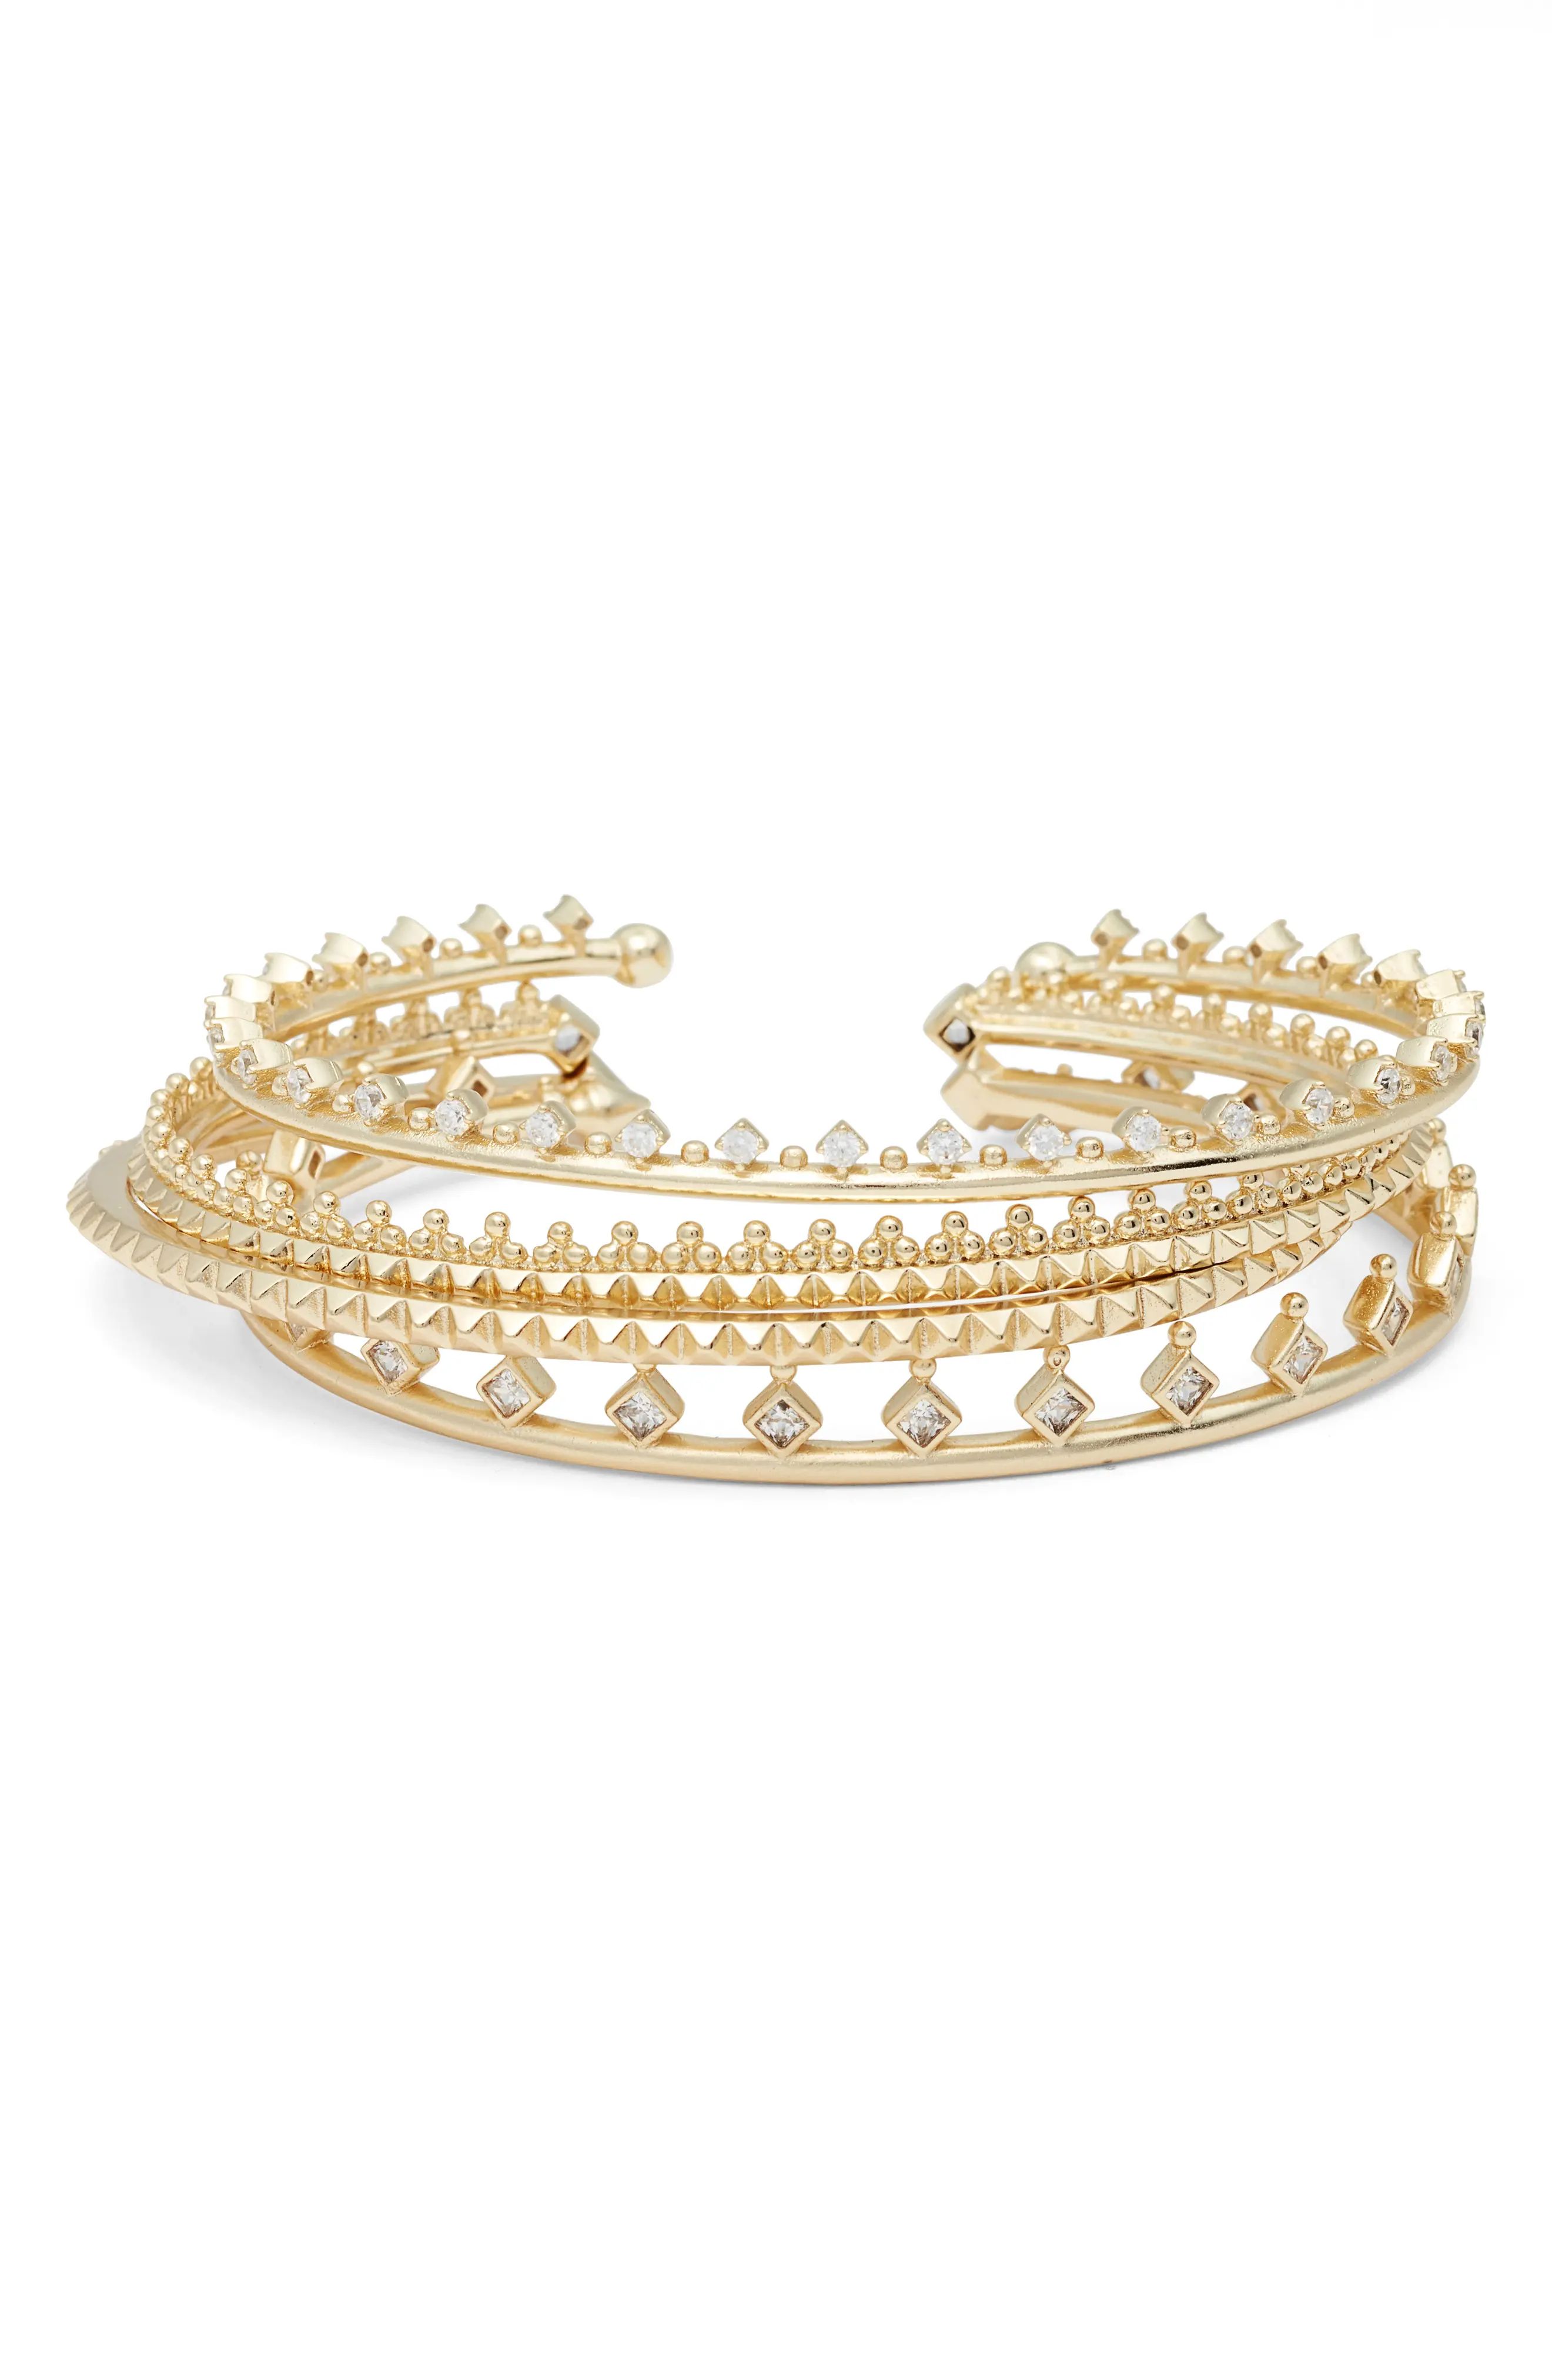 Delphine Set of 4 Stackable Cuffs | Nordstrom